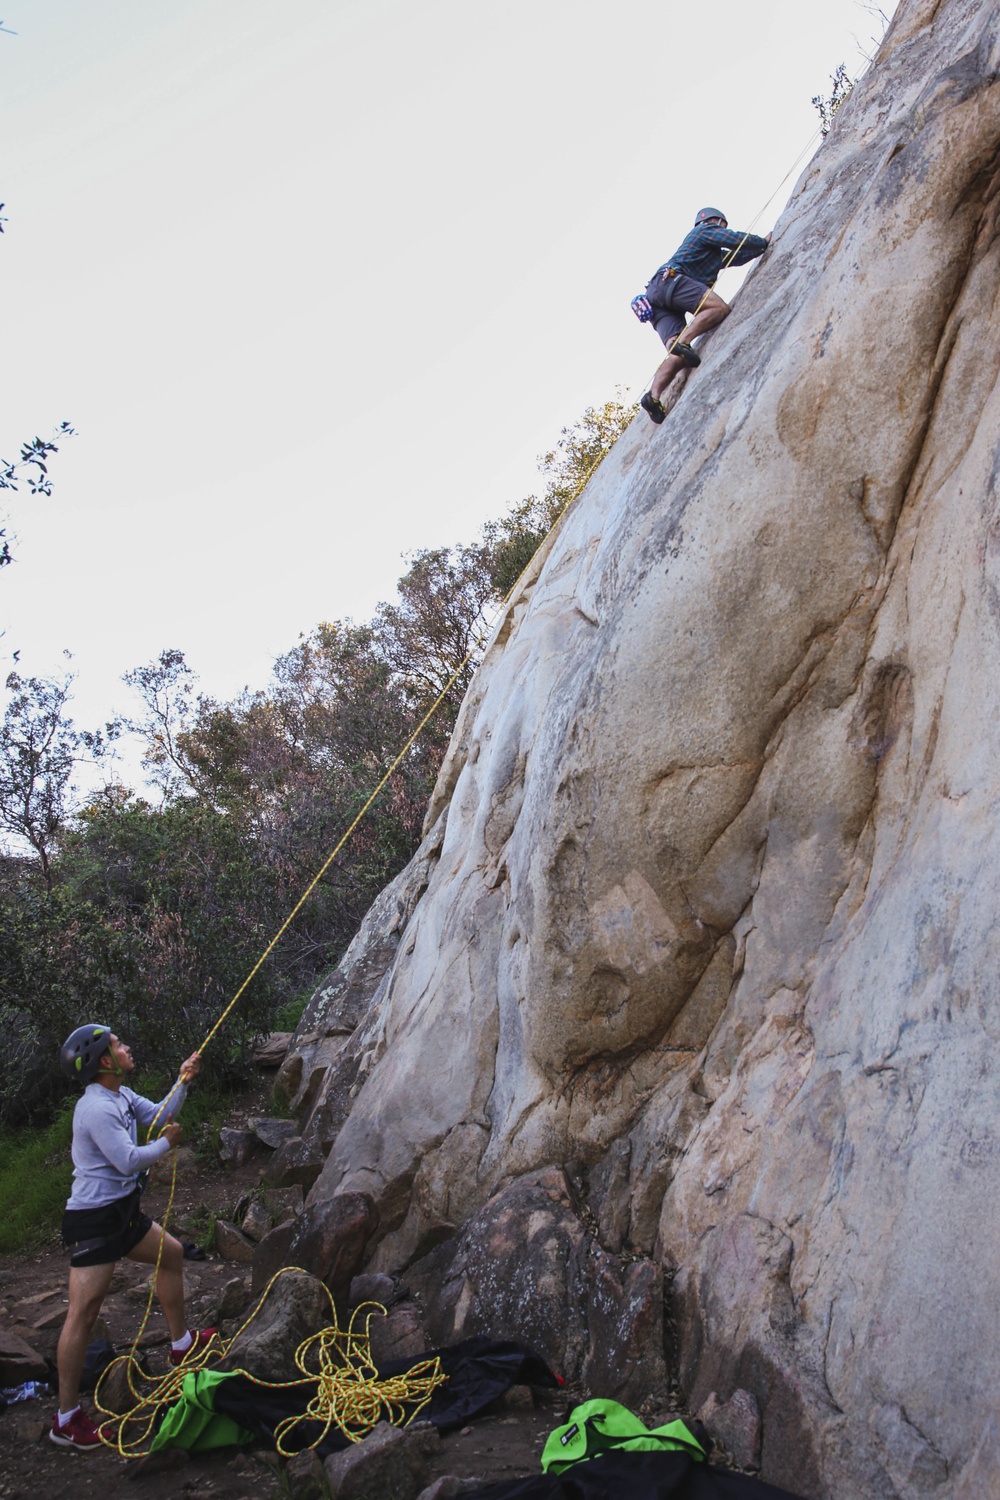 Marines with 1st Transportation Battalion Try Rock Climbing